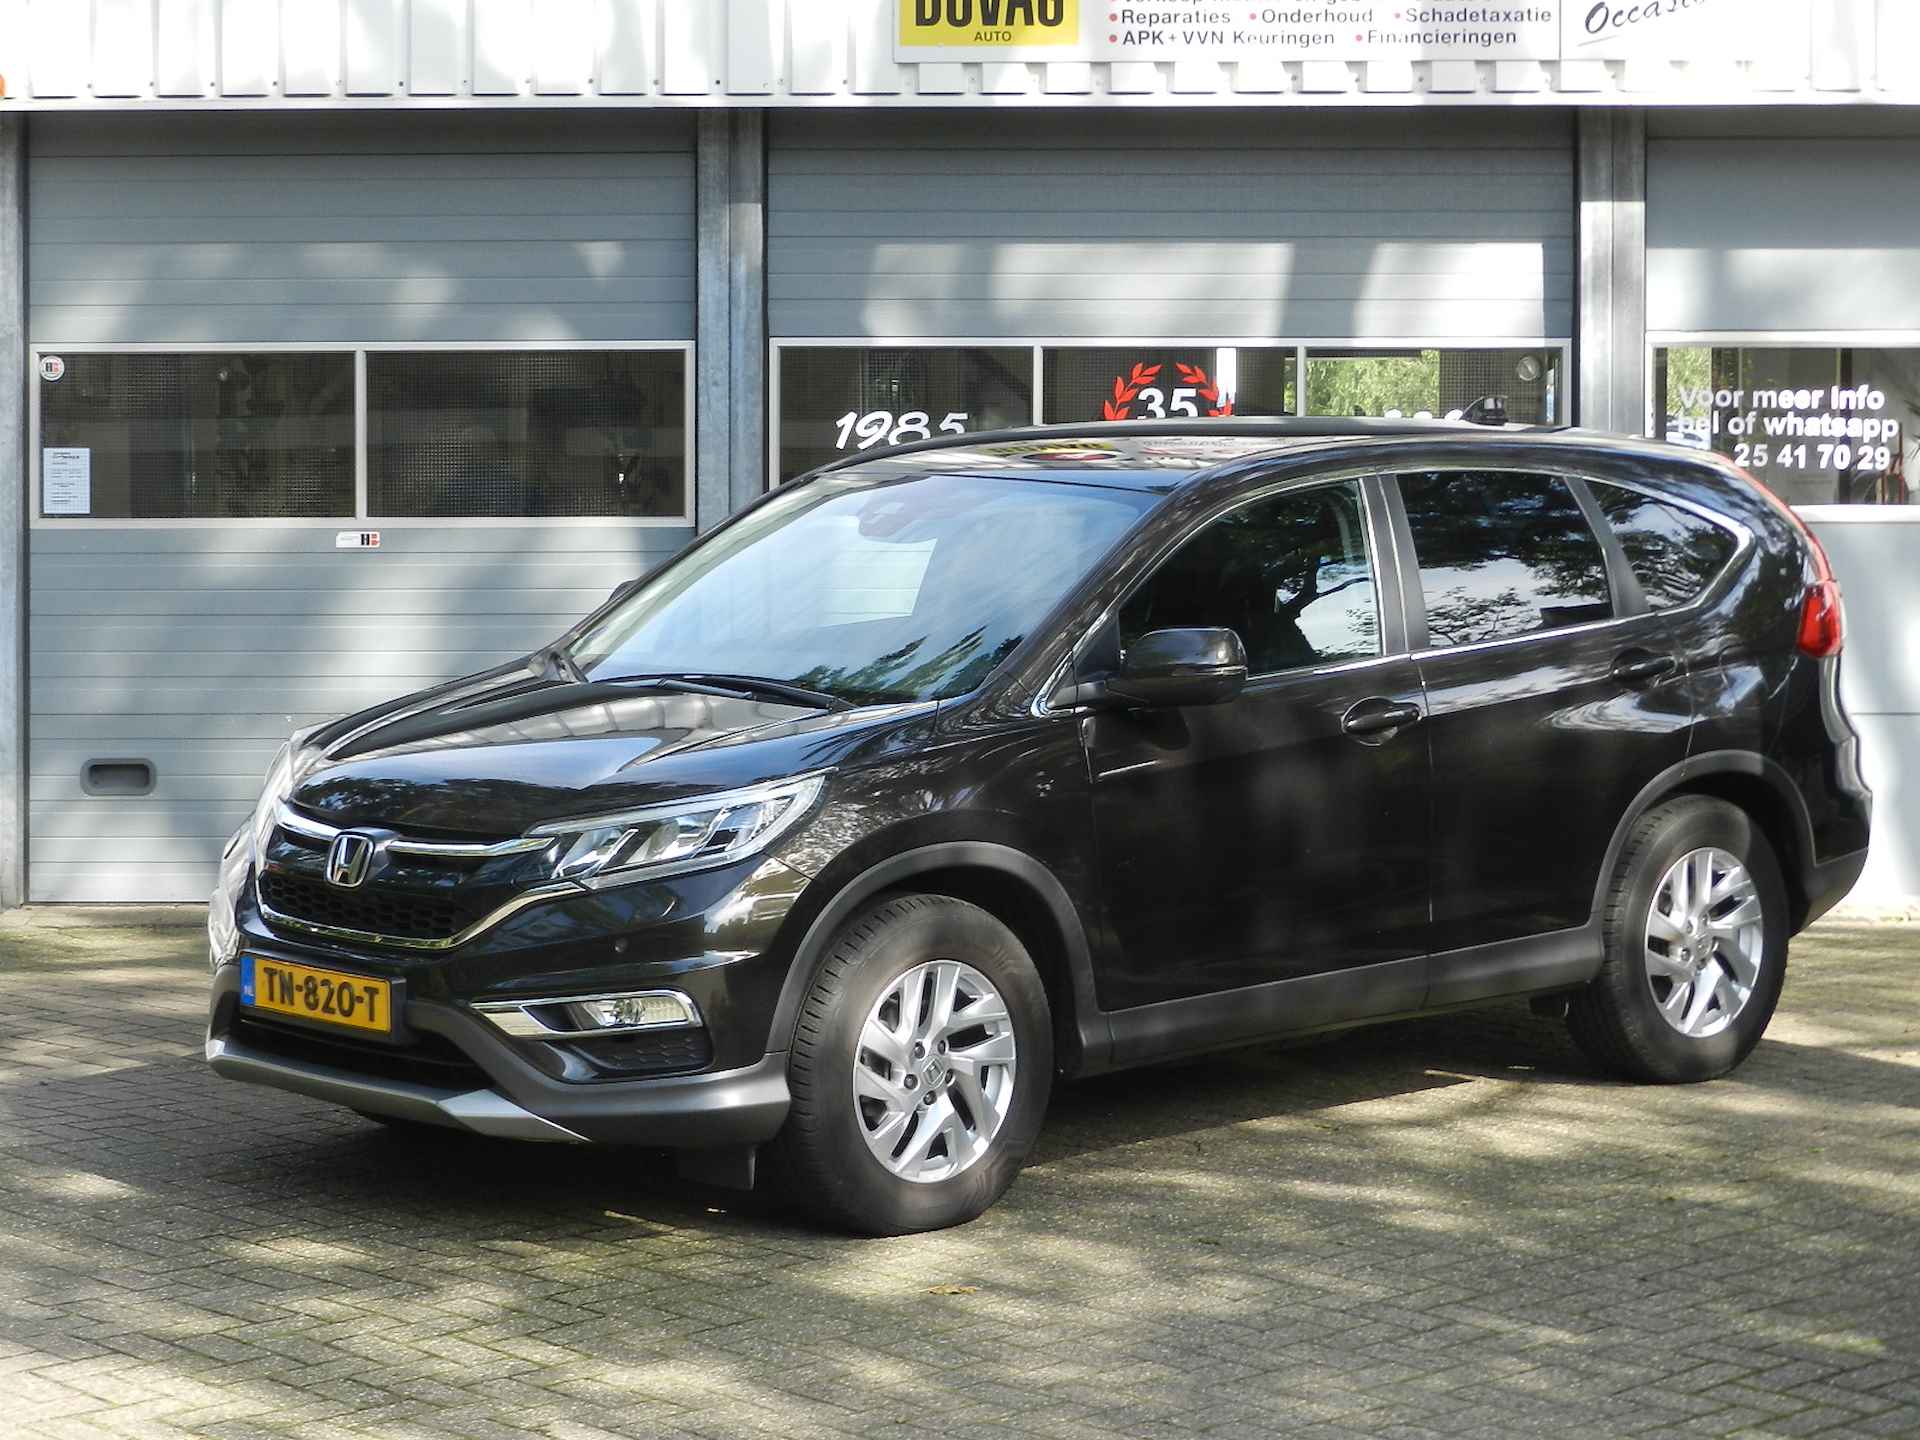 Honda CR-V 2.0 4WD Lifestyle Automaat Climate en Cruise contr PDC Camera - 3/50